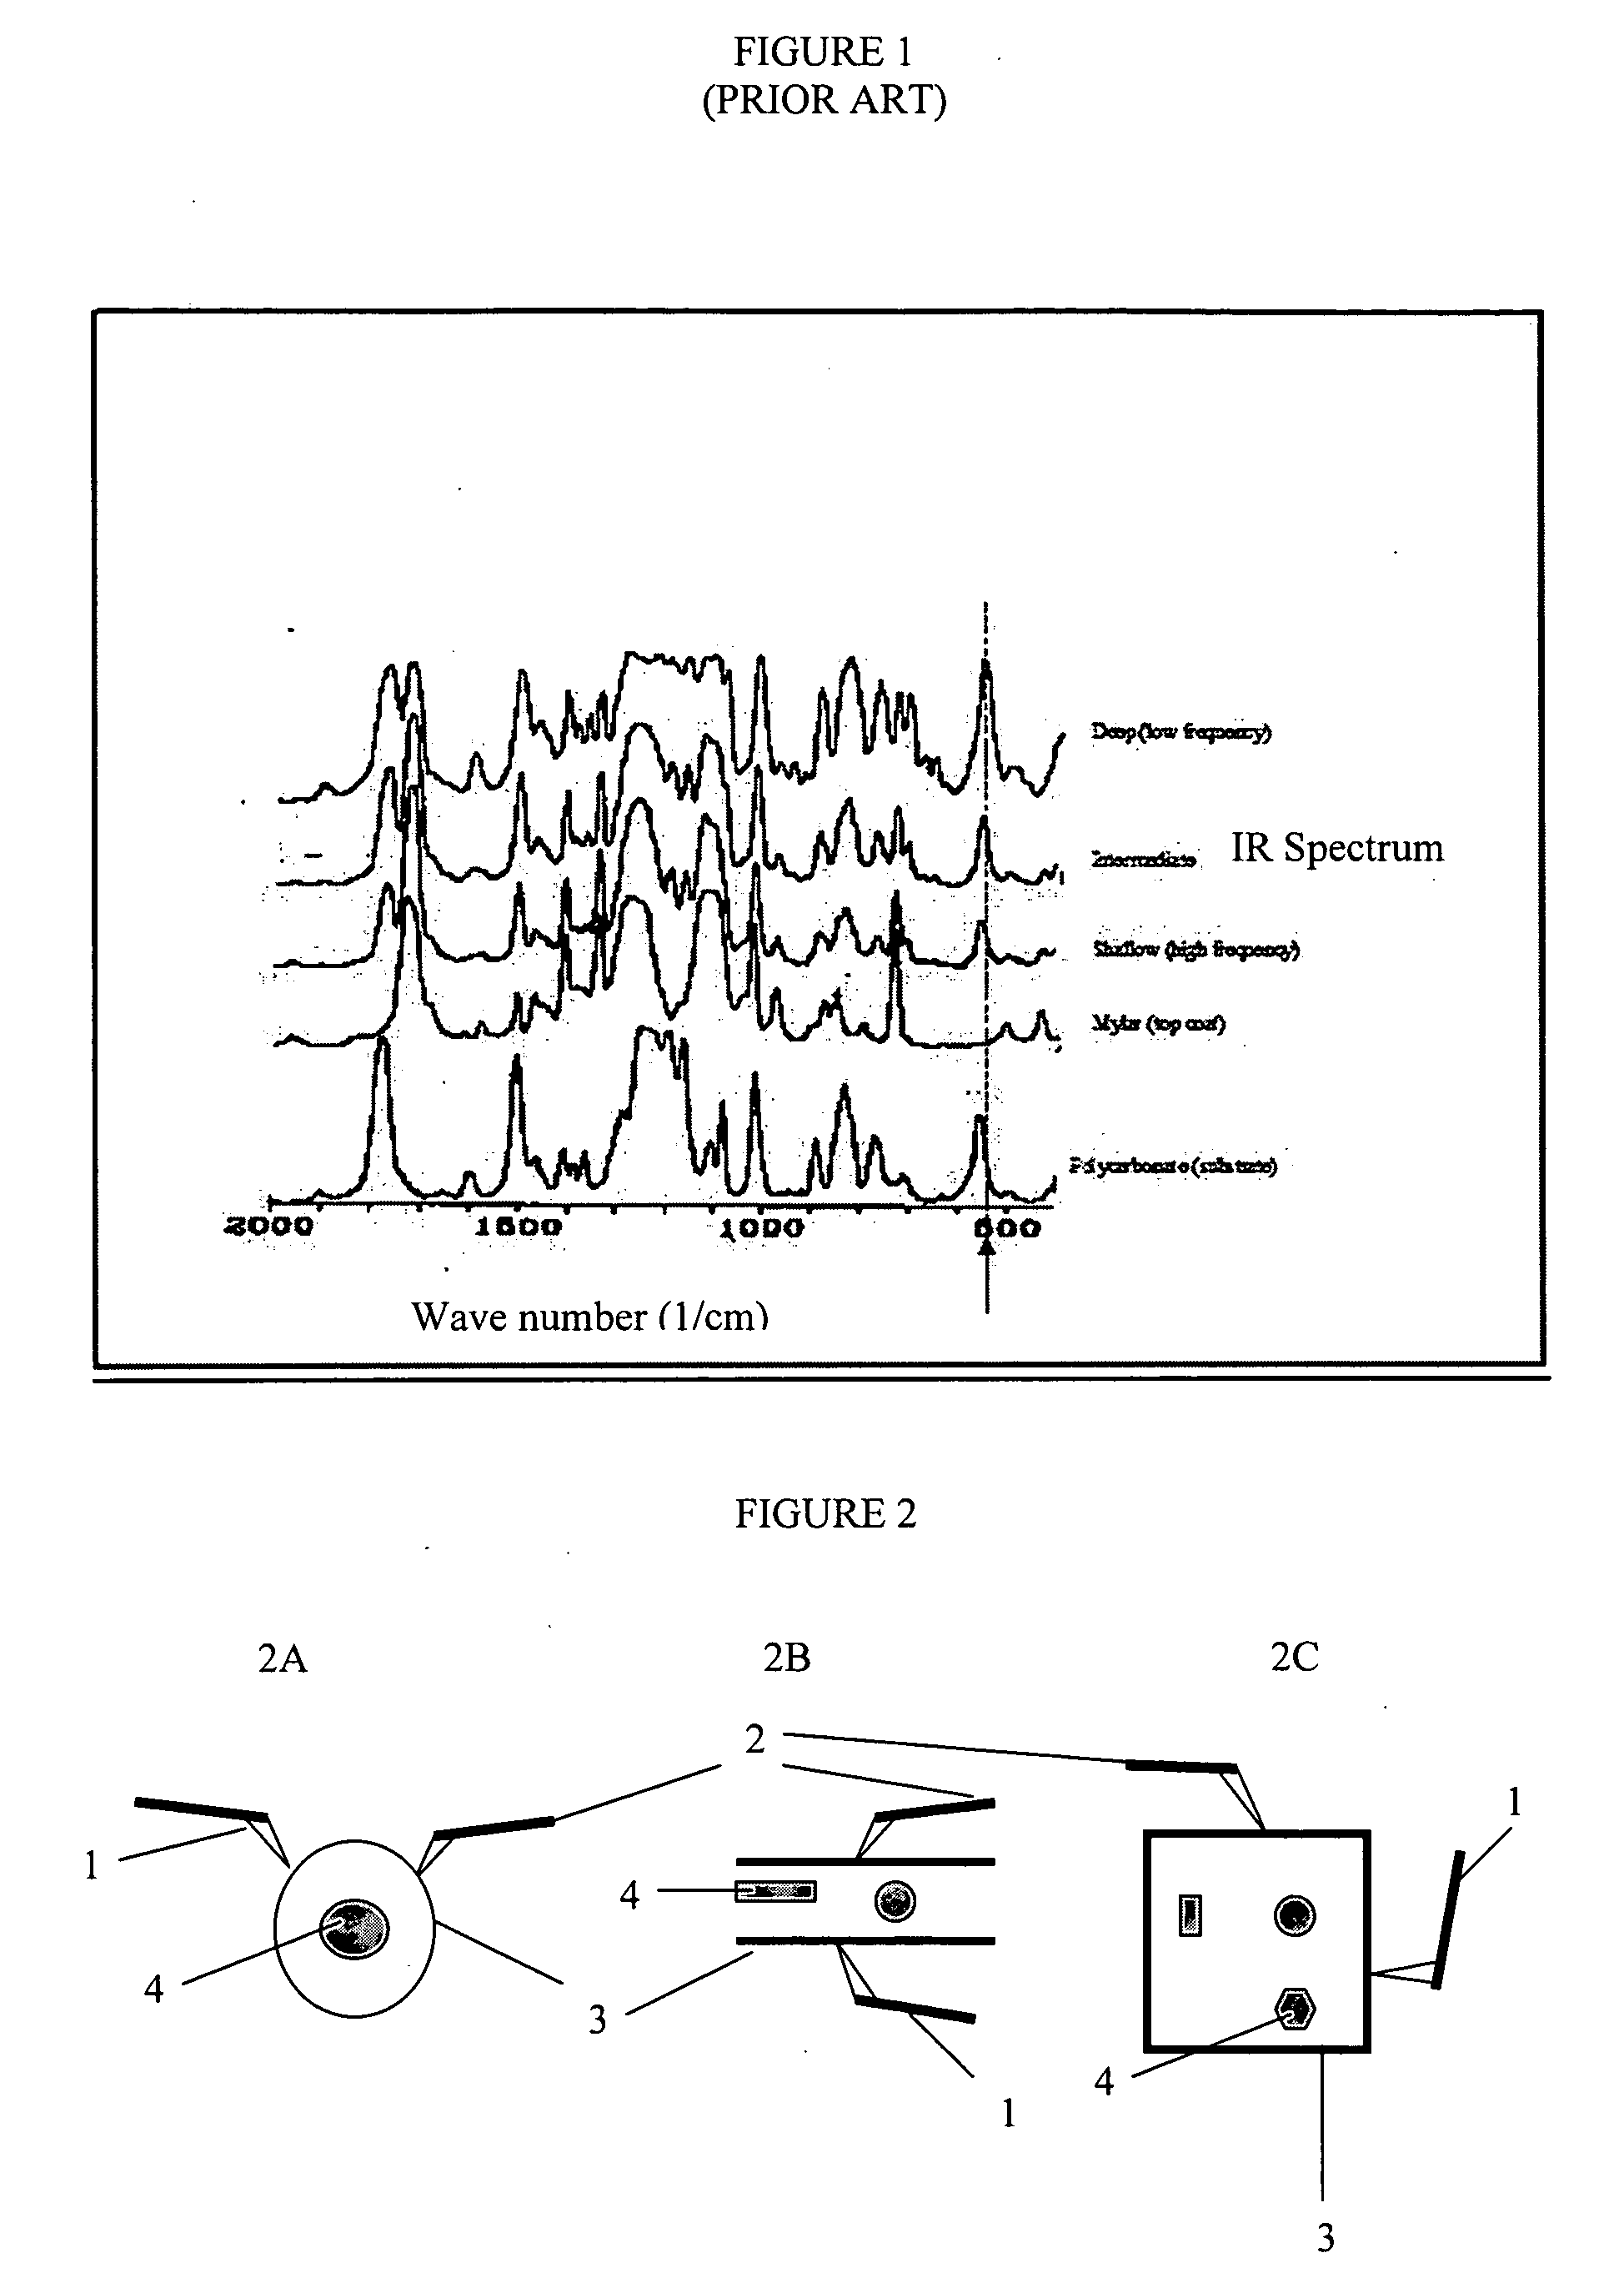 Method and apparatus for localized infrared spectrocopy and micro-tomography using a combination of thermal expansion and temperature change measurements